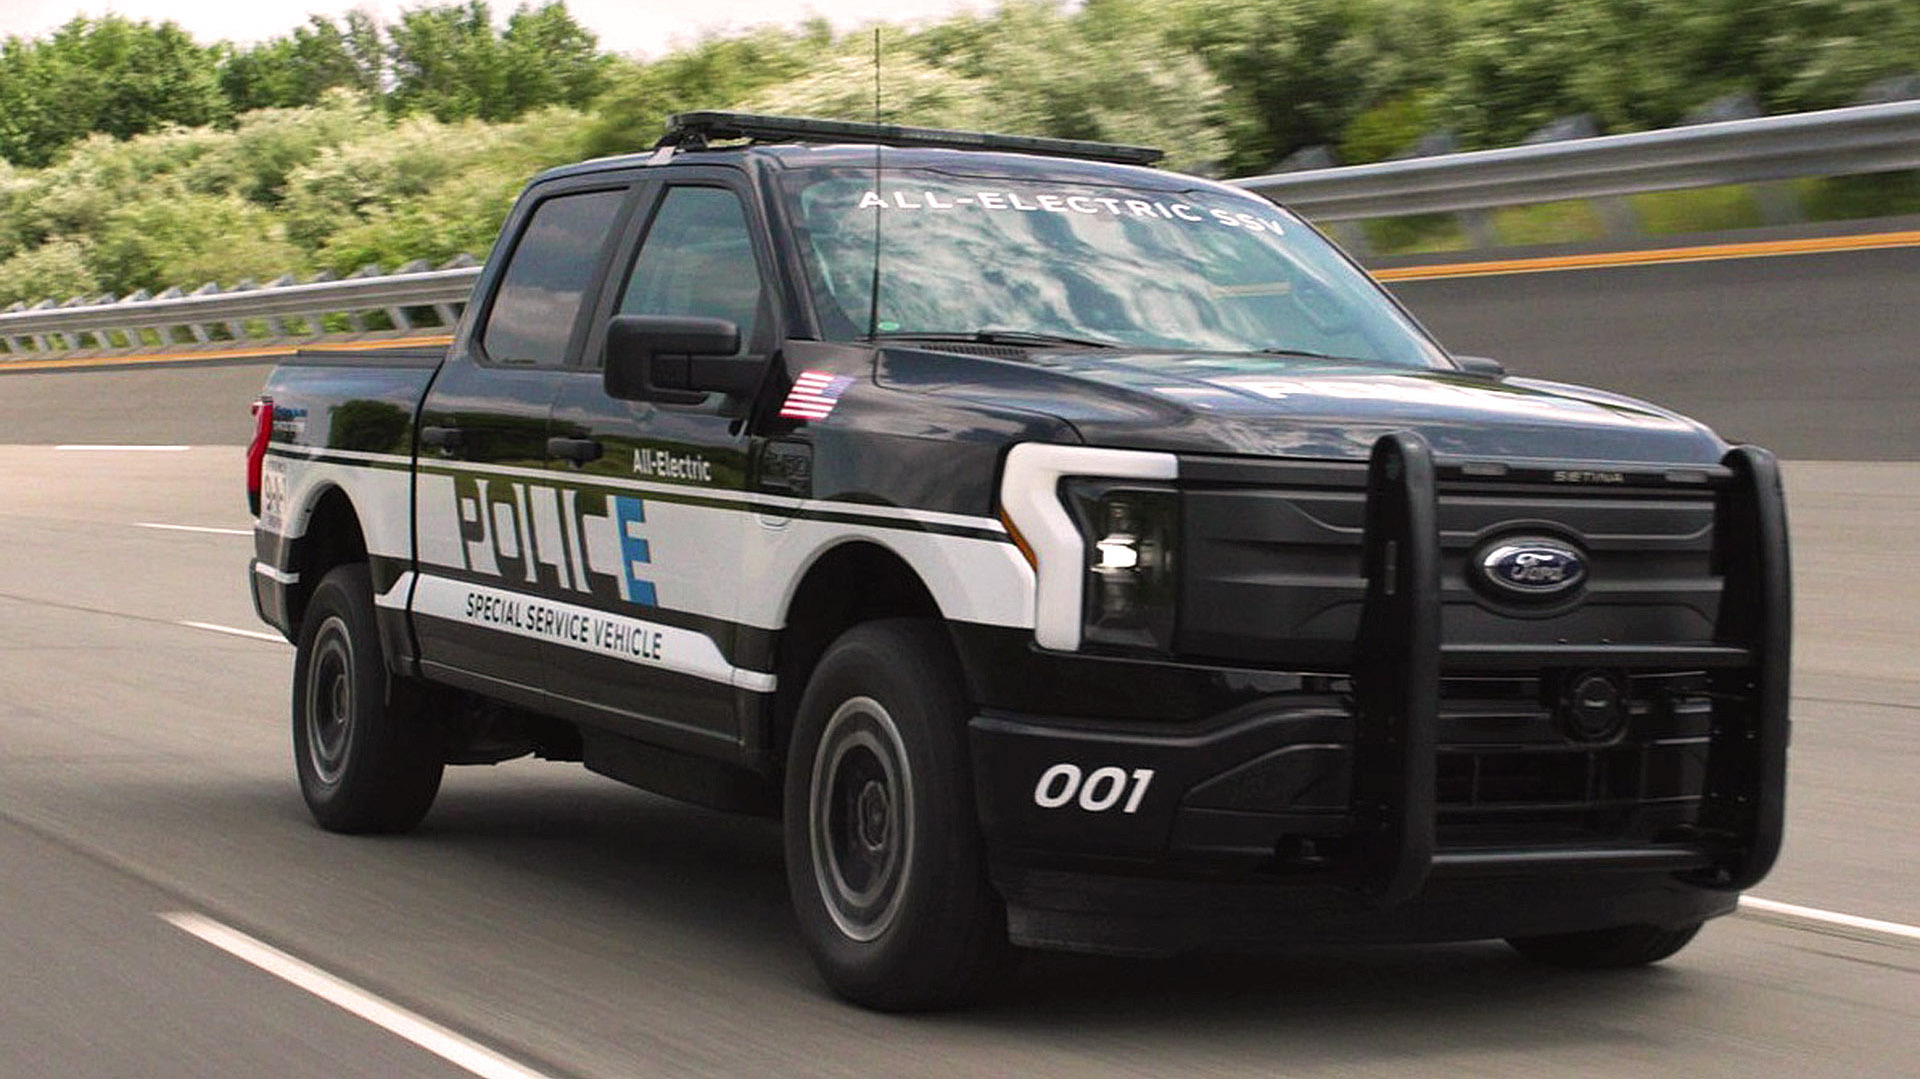 The F-150 Lightning Pro SSV has undergone rigorous testing before being released to equip US state police departments.